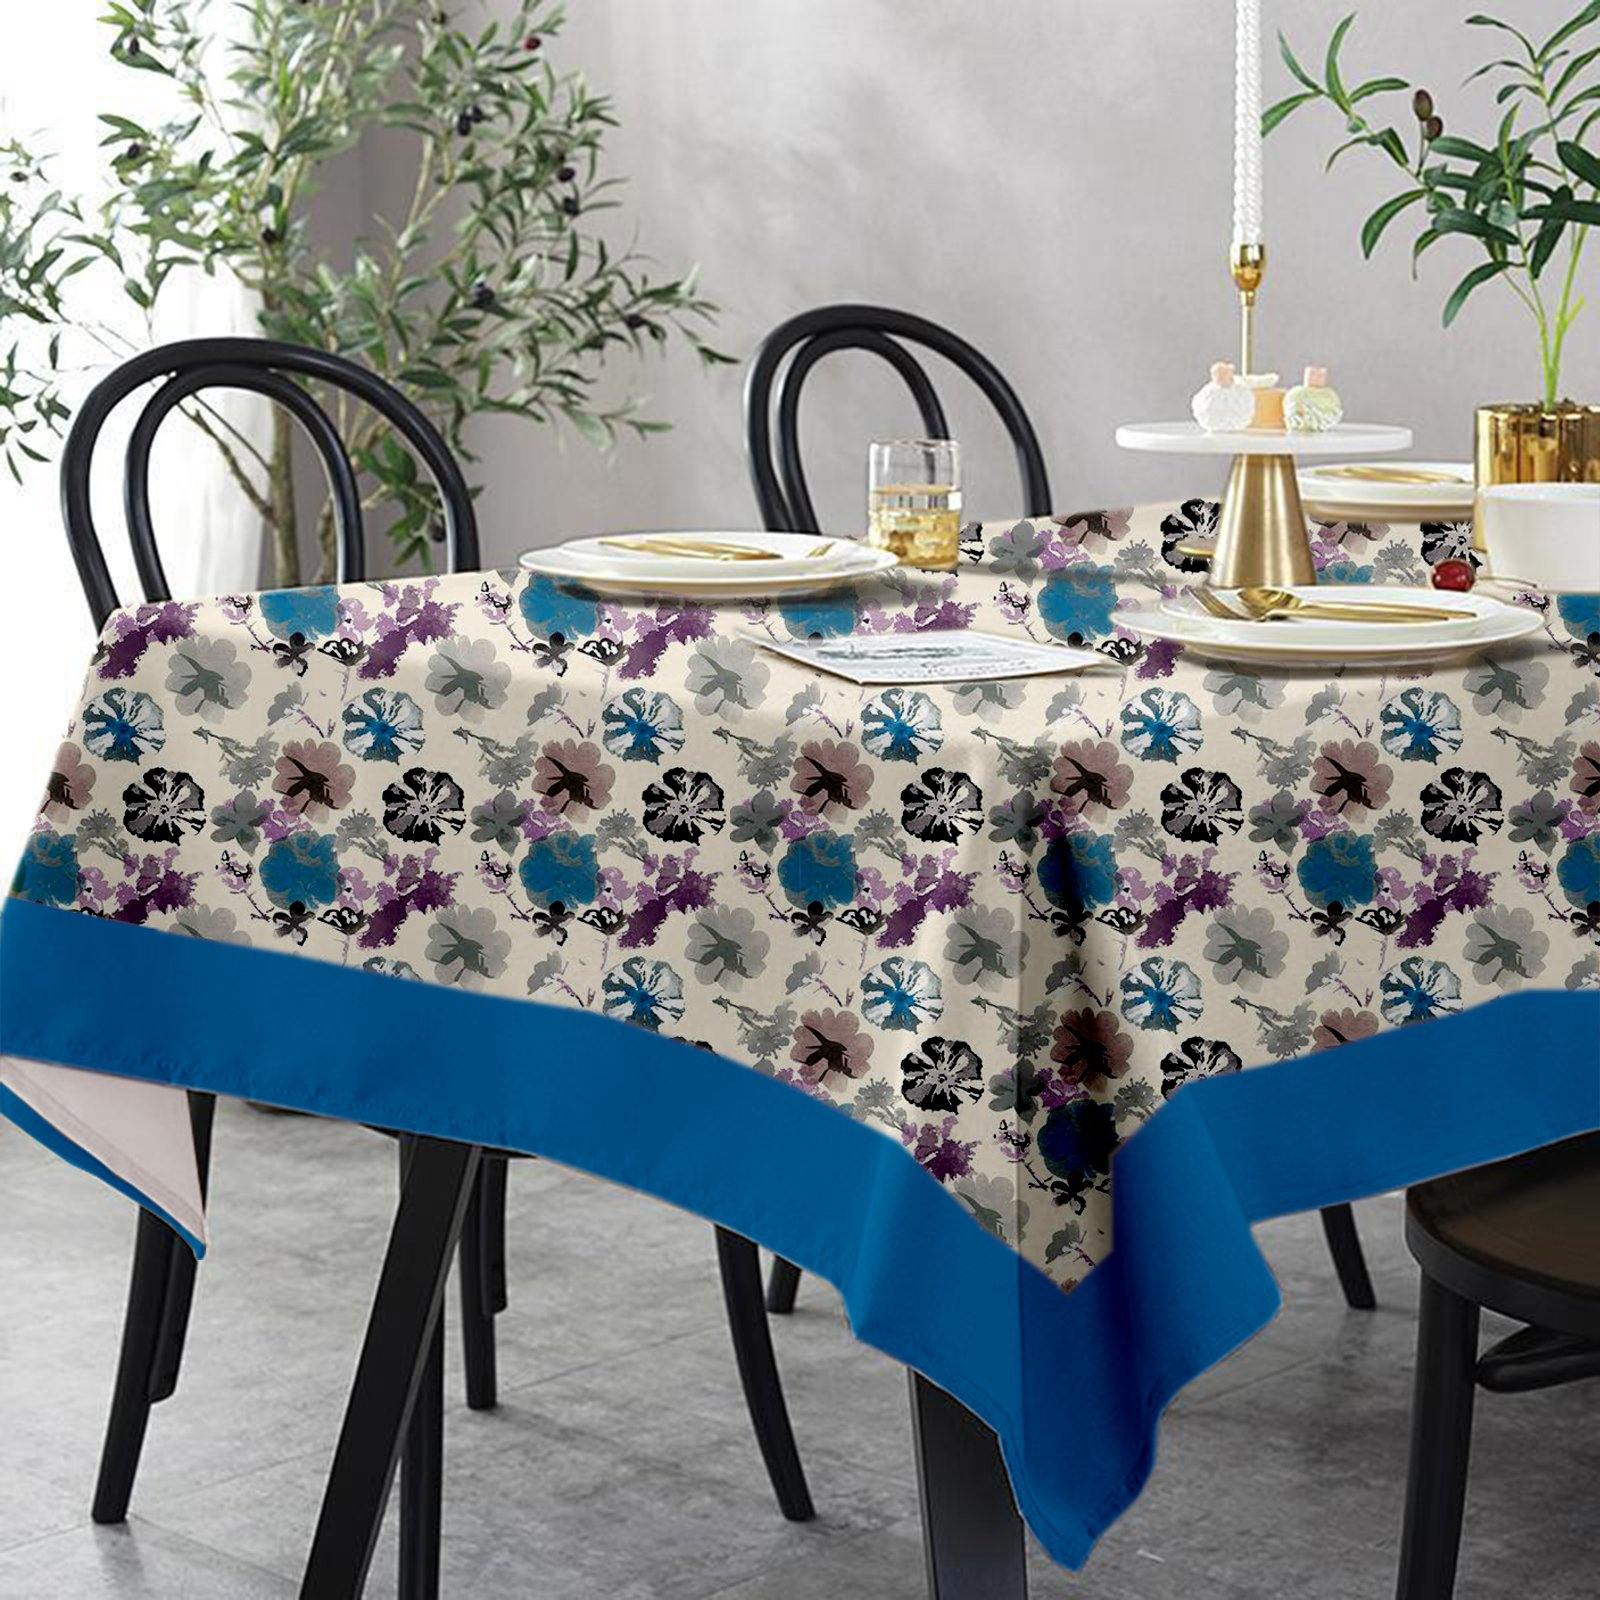 Lushomes 6 Seater Small Watercolor Printed Dining Table Cover Cloth Linen (Pack of 1, 78 x 55 inches) - Lushomes